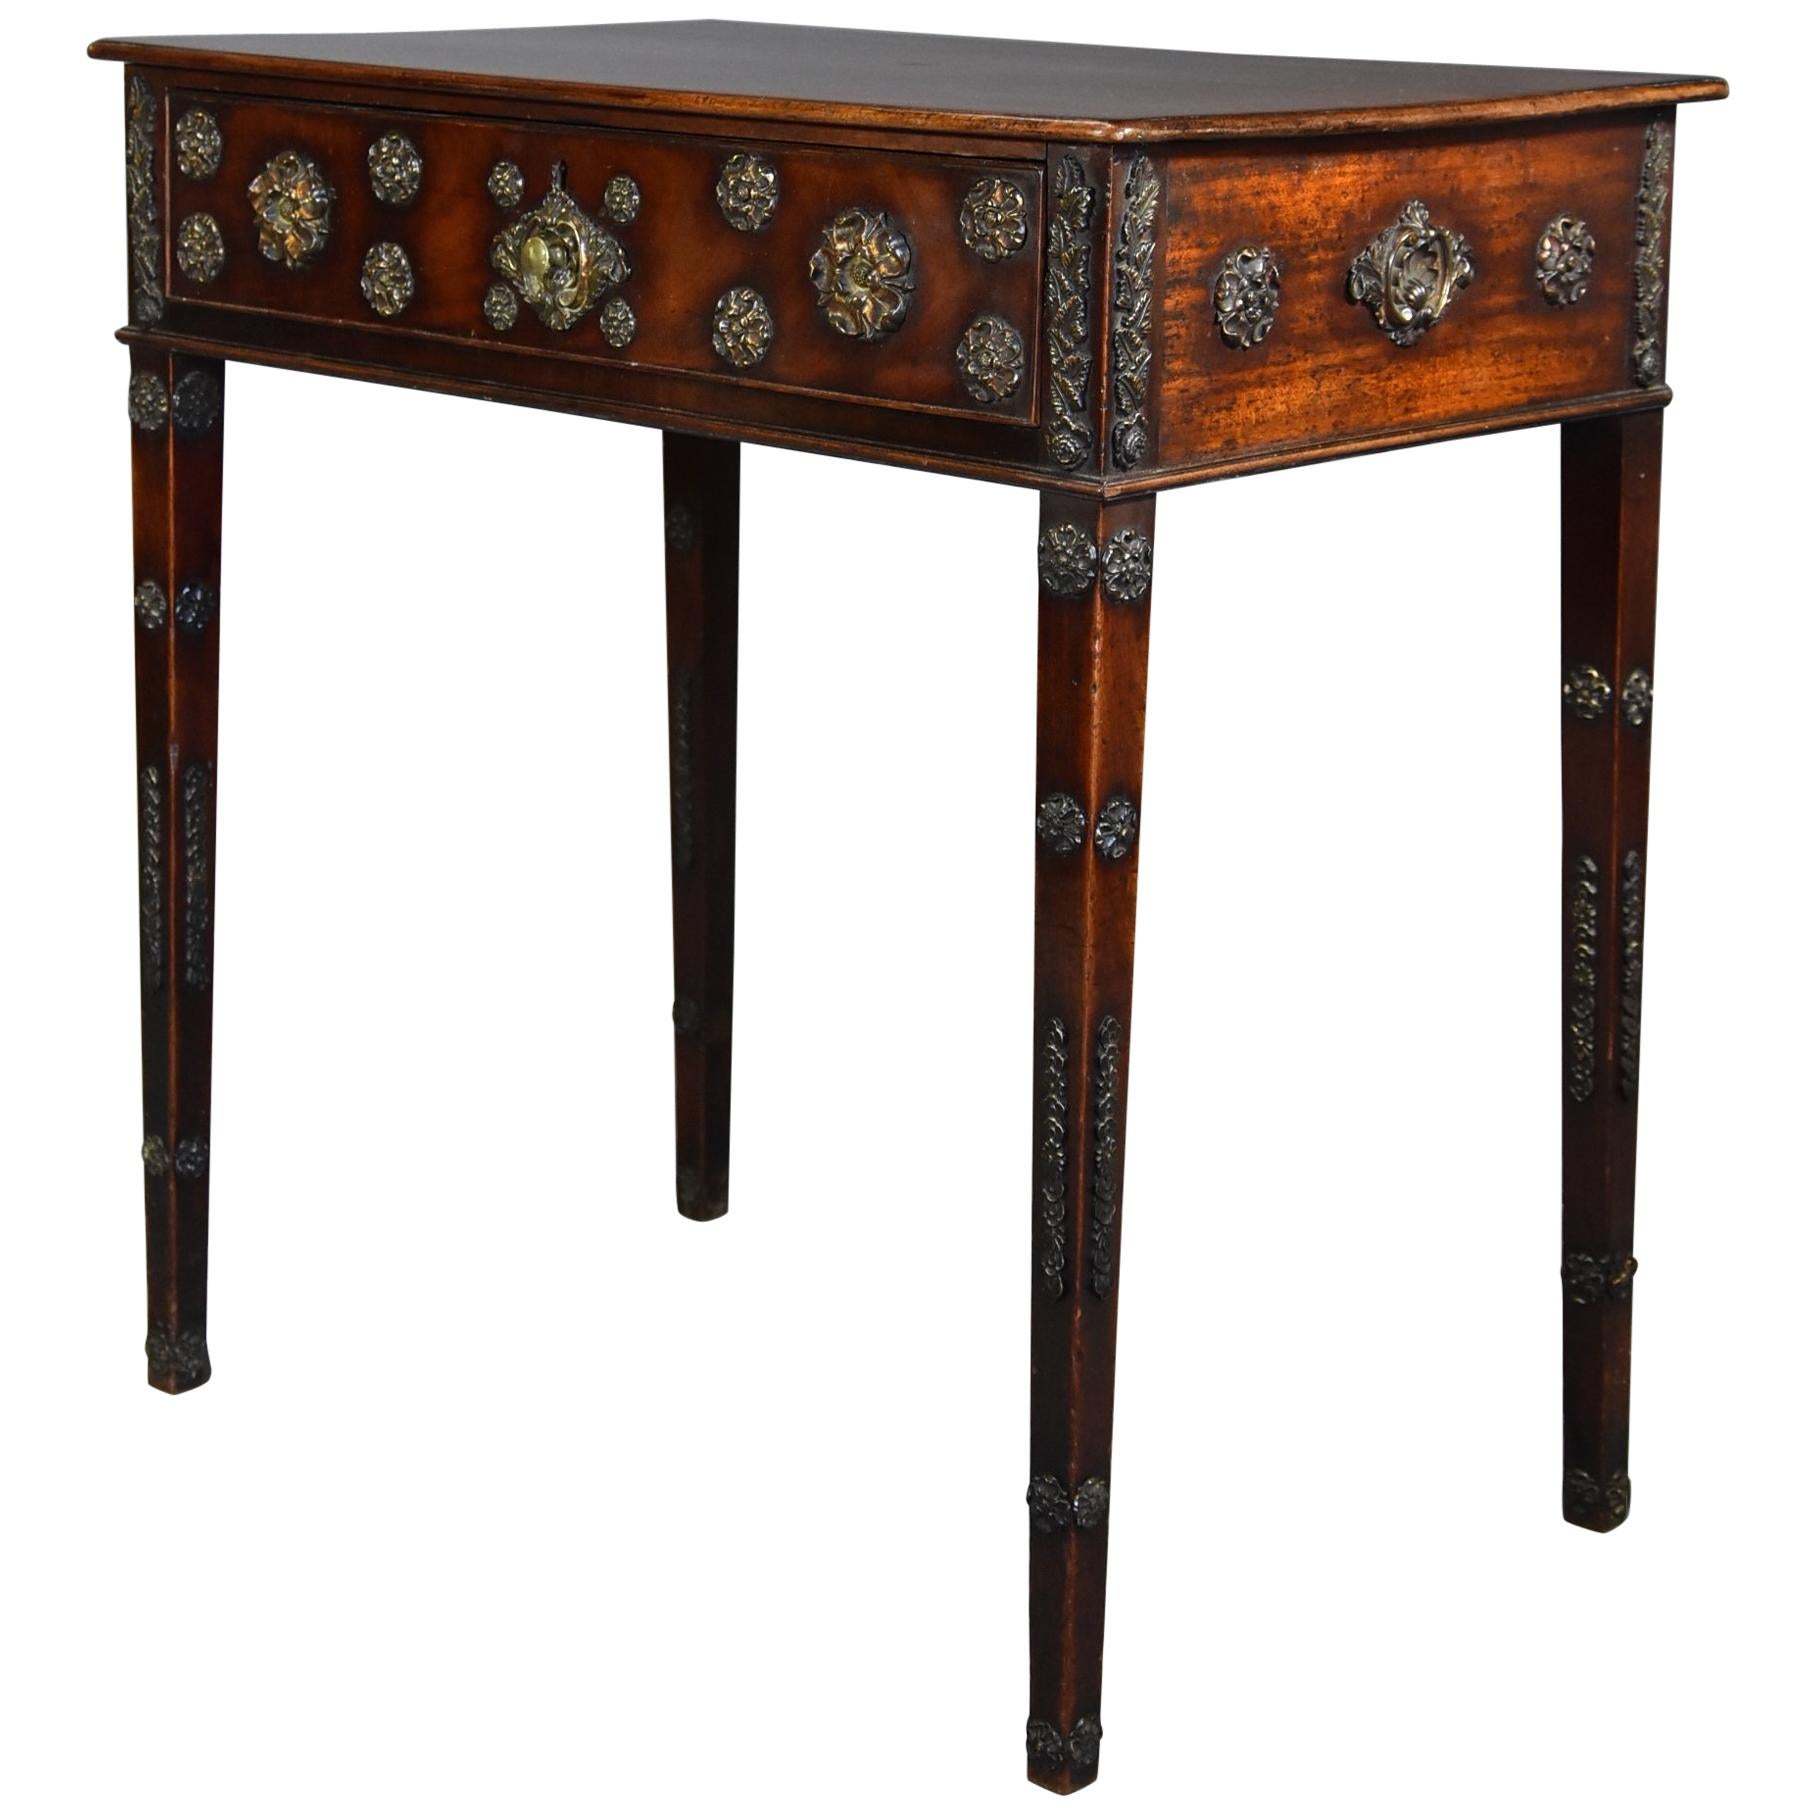 Decorative Late 18th Century Mahogany Side Table with Later Applied Brass Mounts